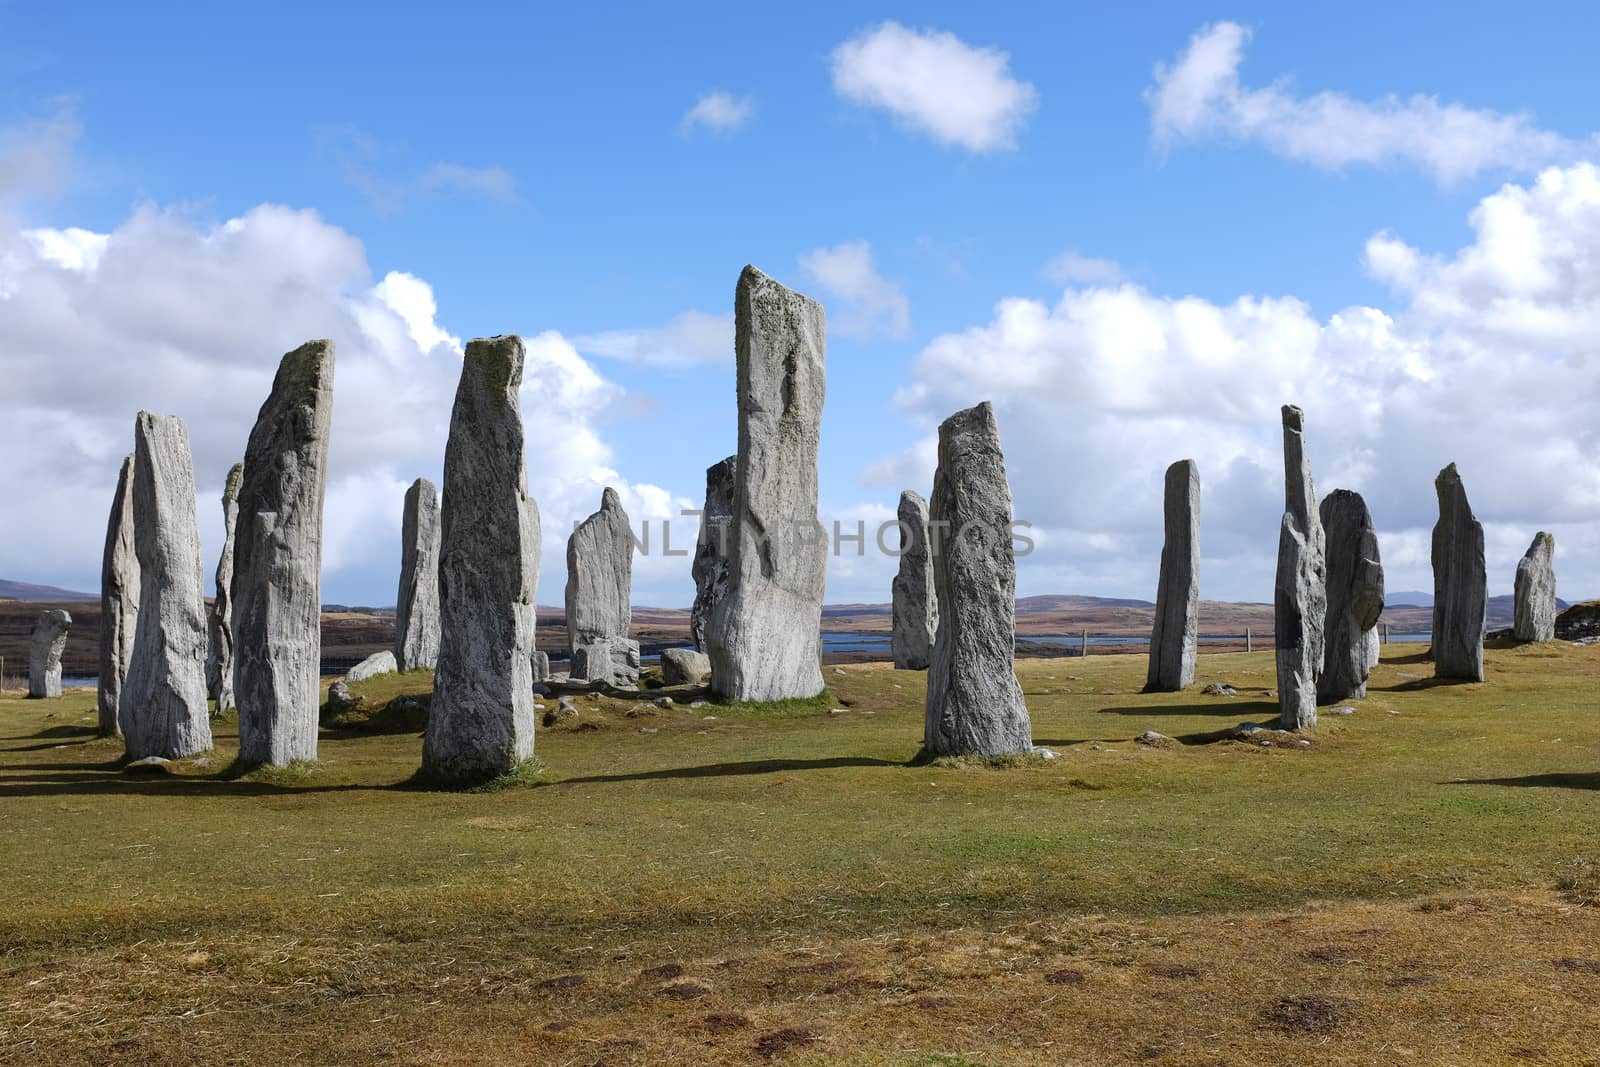 Standing stone circle on green grass with a blue cloudy sky at Callanish, Isle of Lewis, Scotland, UK.